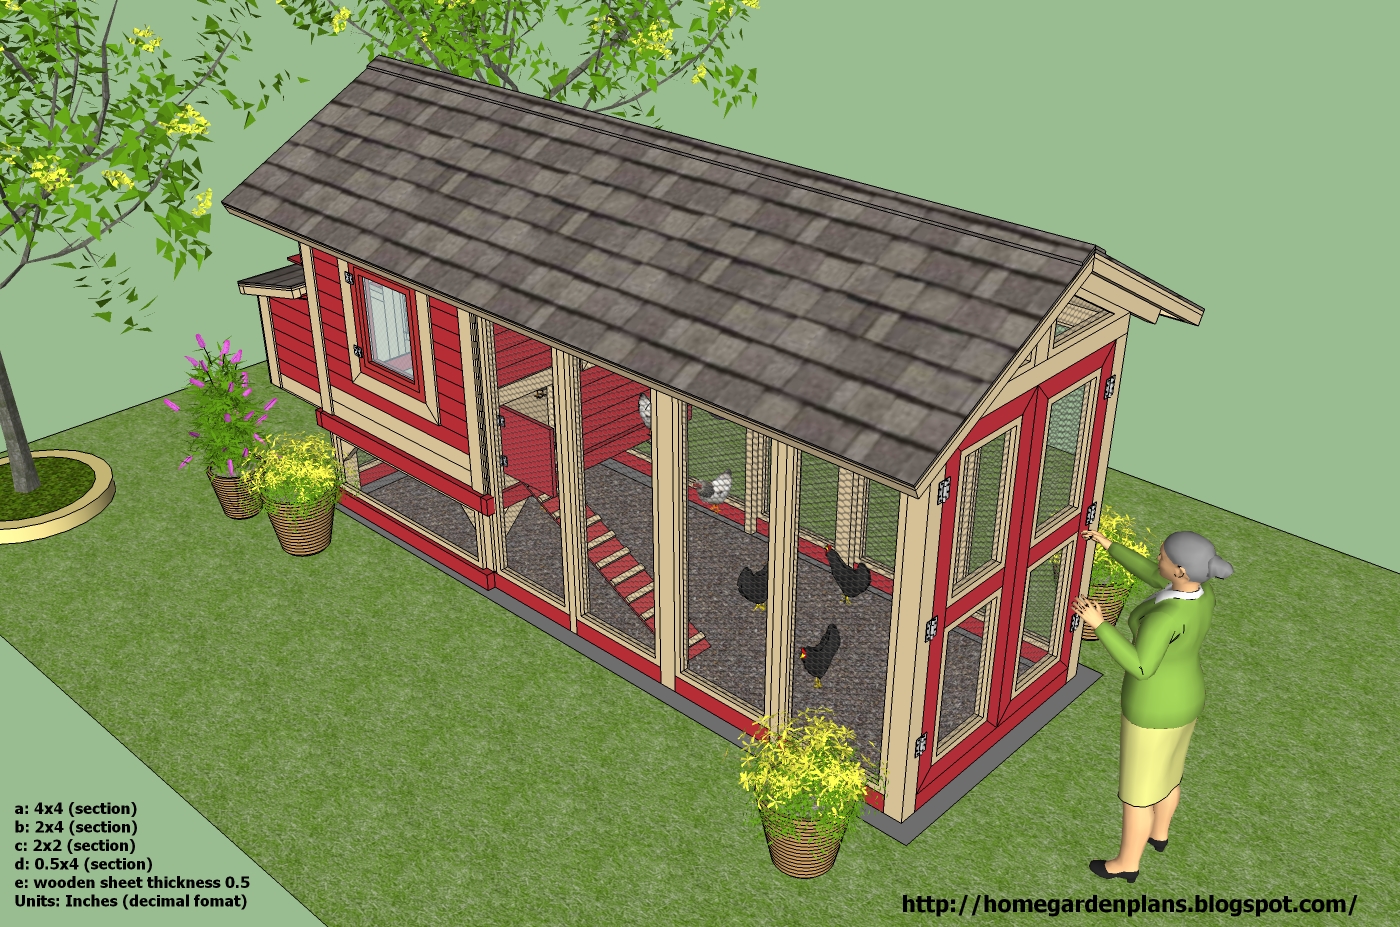 home garden plans: M102 - Chicken Coop Plans - How to 